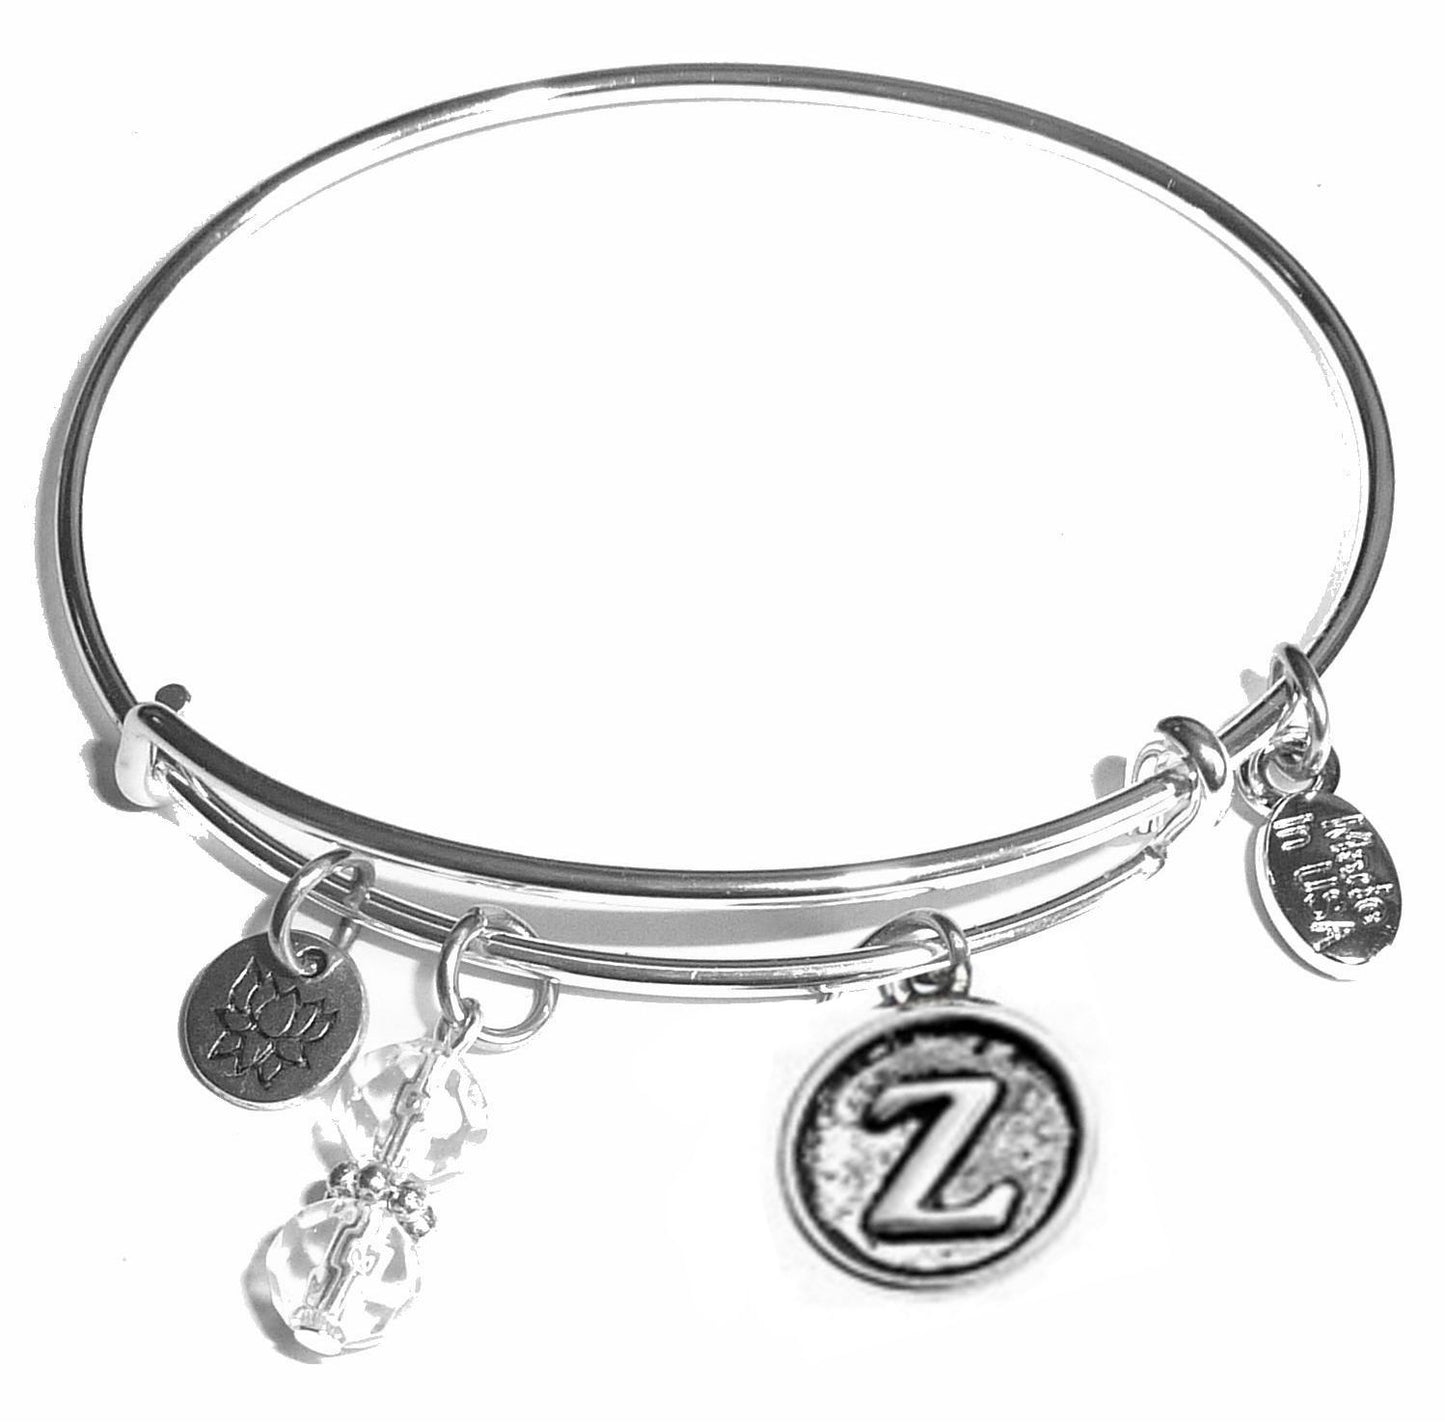 Z - Initial Bangle Bracelet -Expandable Wire Bracelet– Comes in a gift box